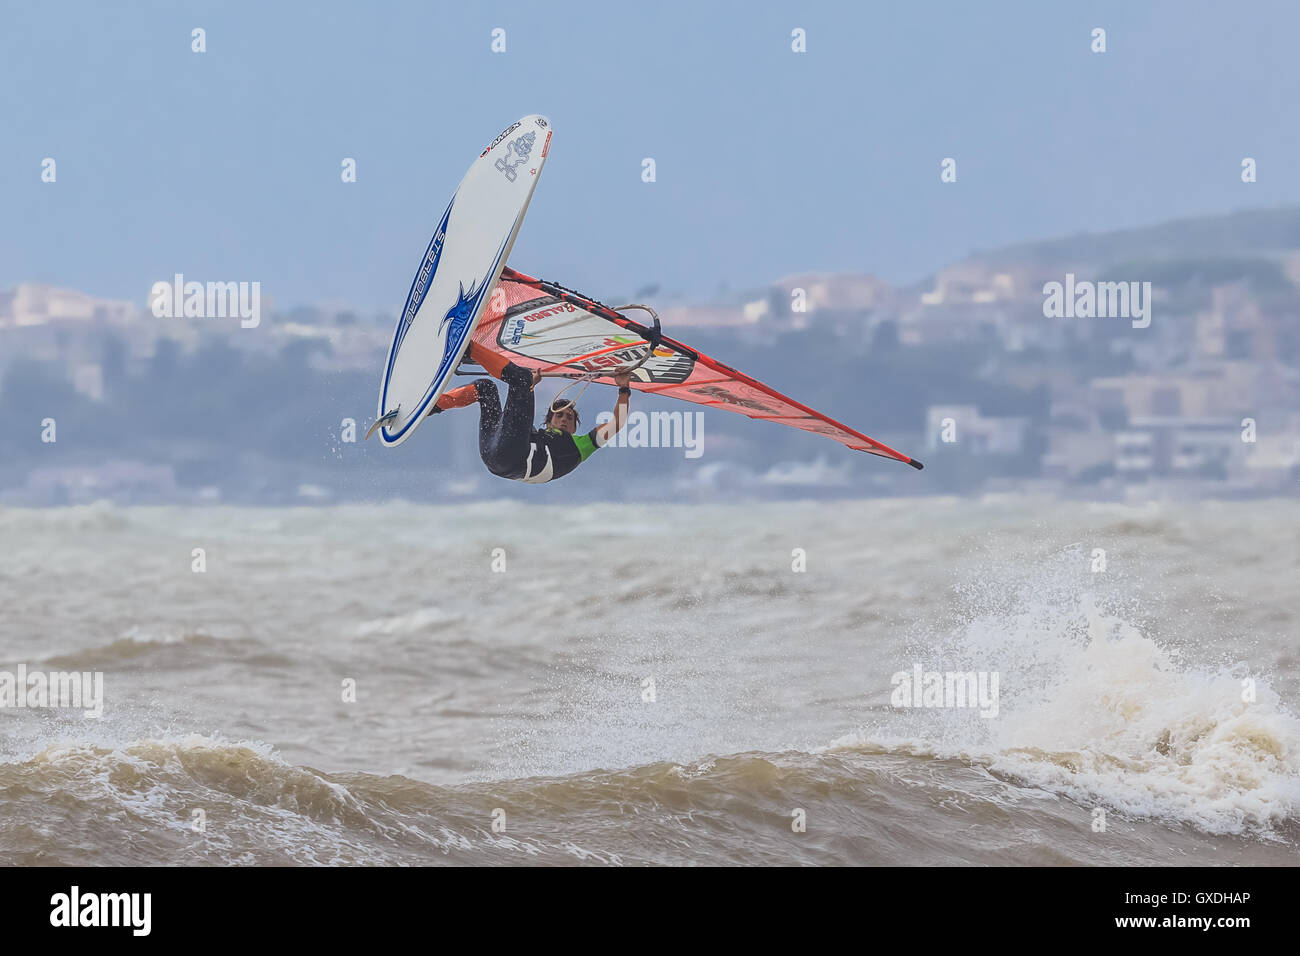 Flying the waves windsurfing Stock Photo